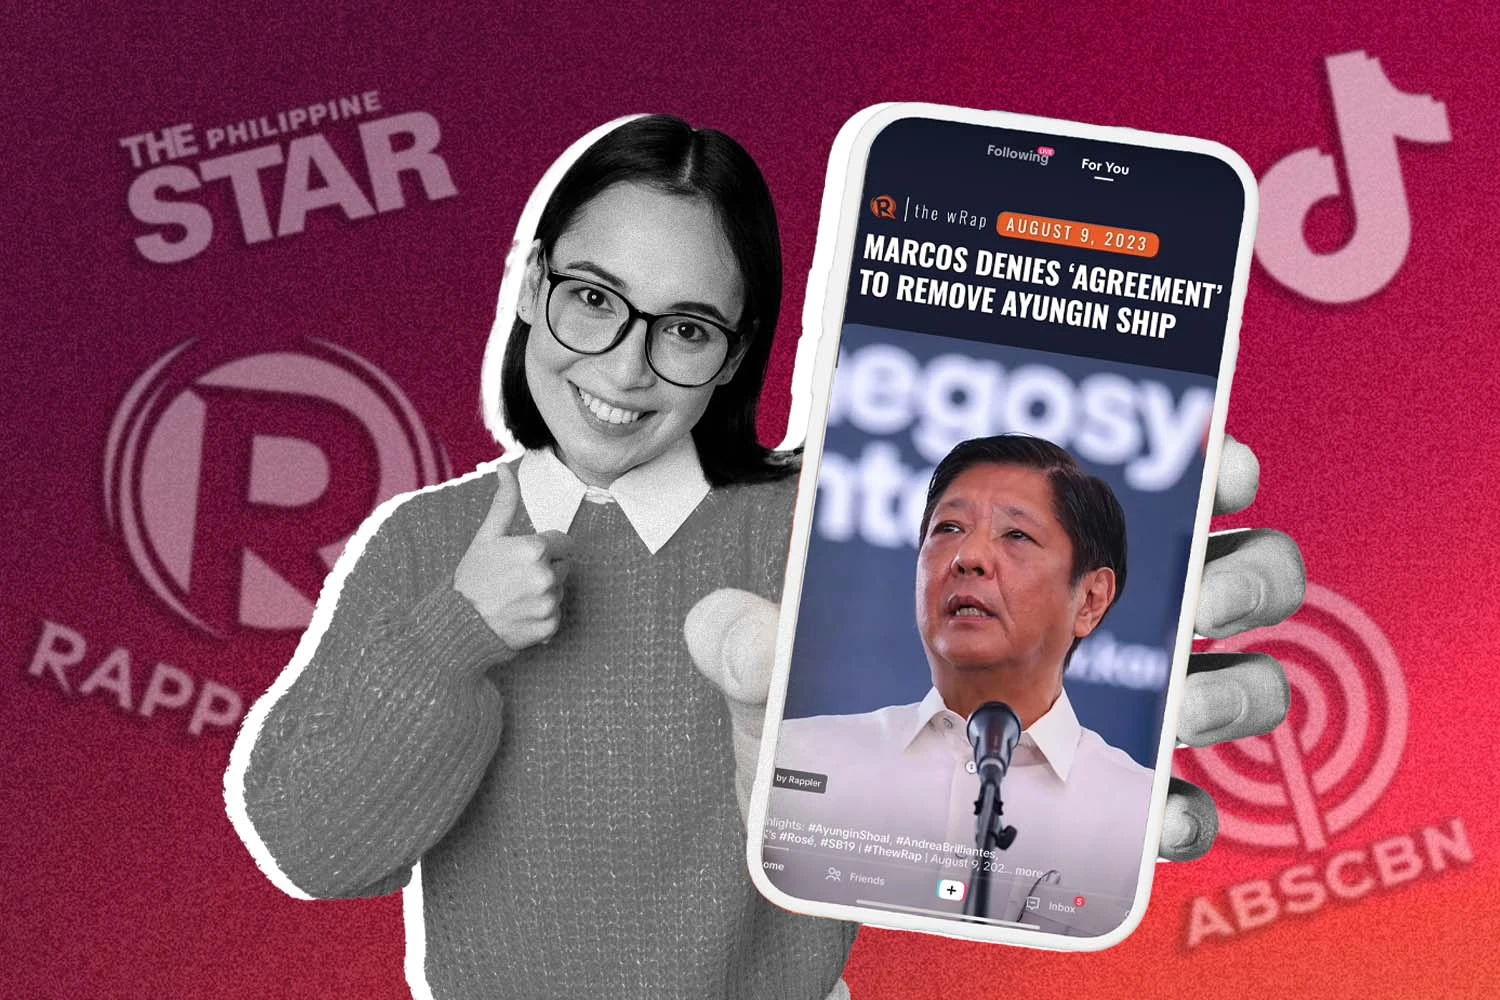 Logos of news publications on tiktok including Rappler, Abs-cbn, and Philippine star.